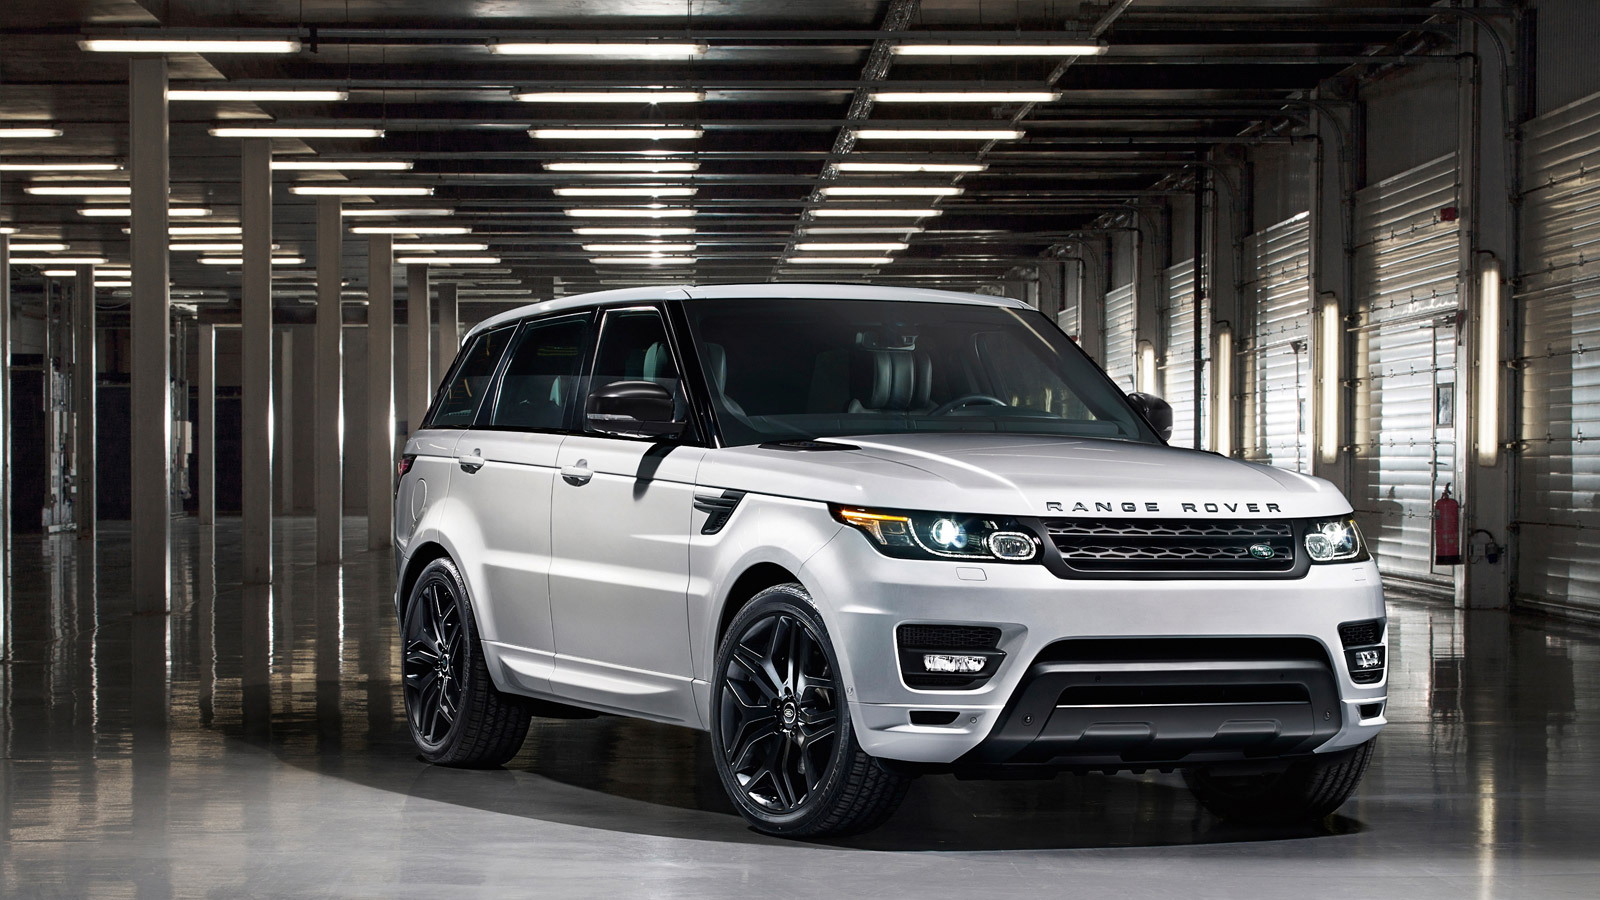 2015 Land Rover Range Rover Sport equipped with Stealth Pack